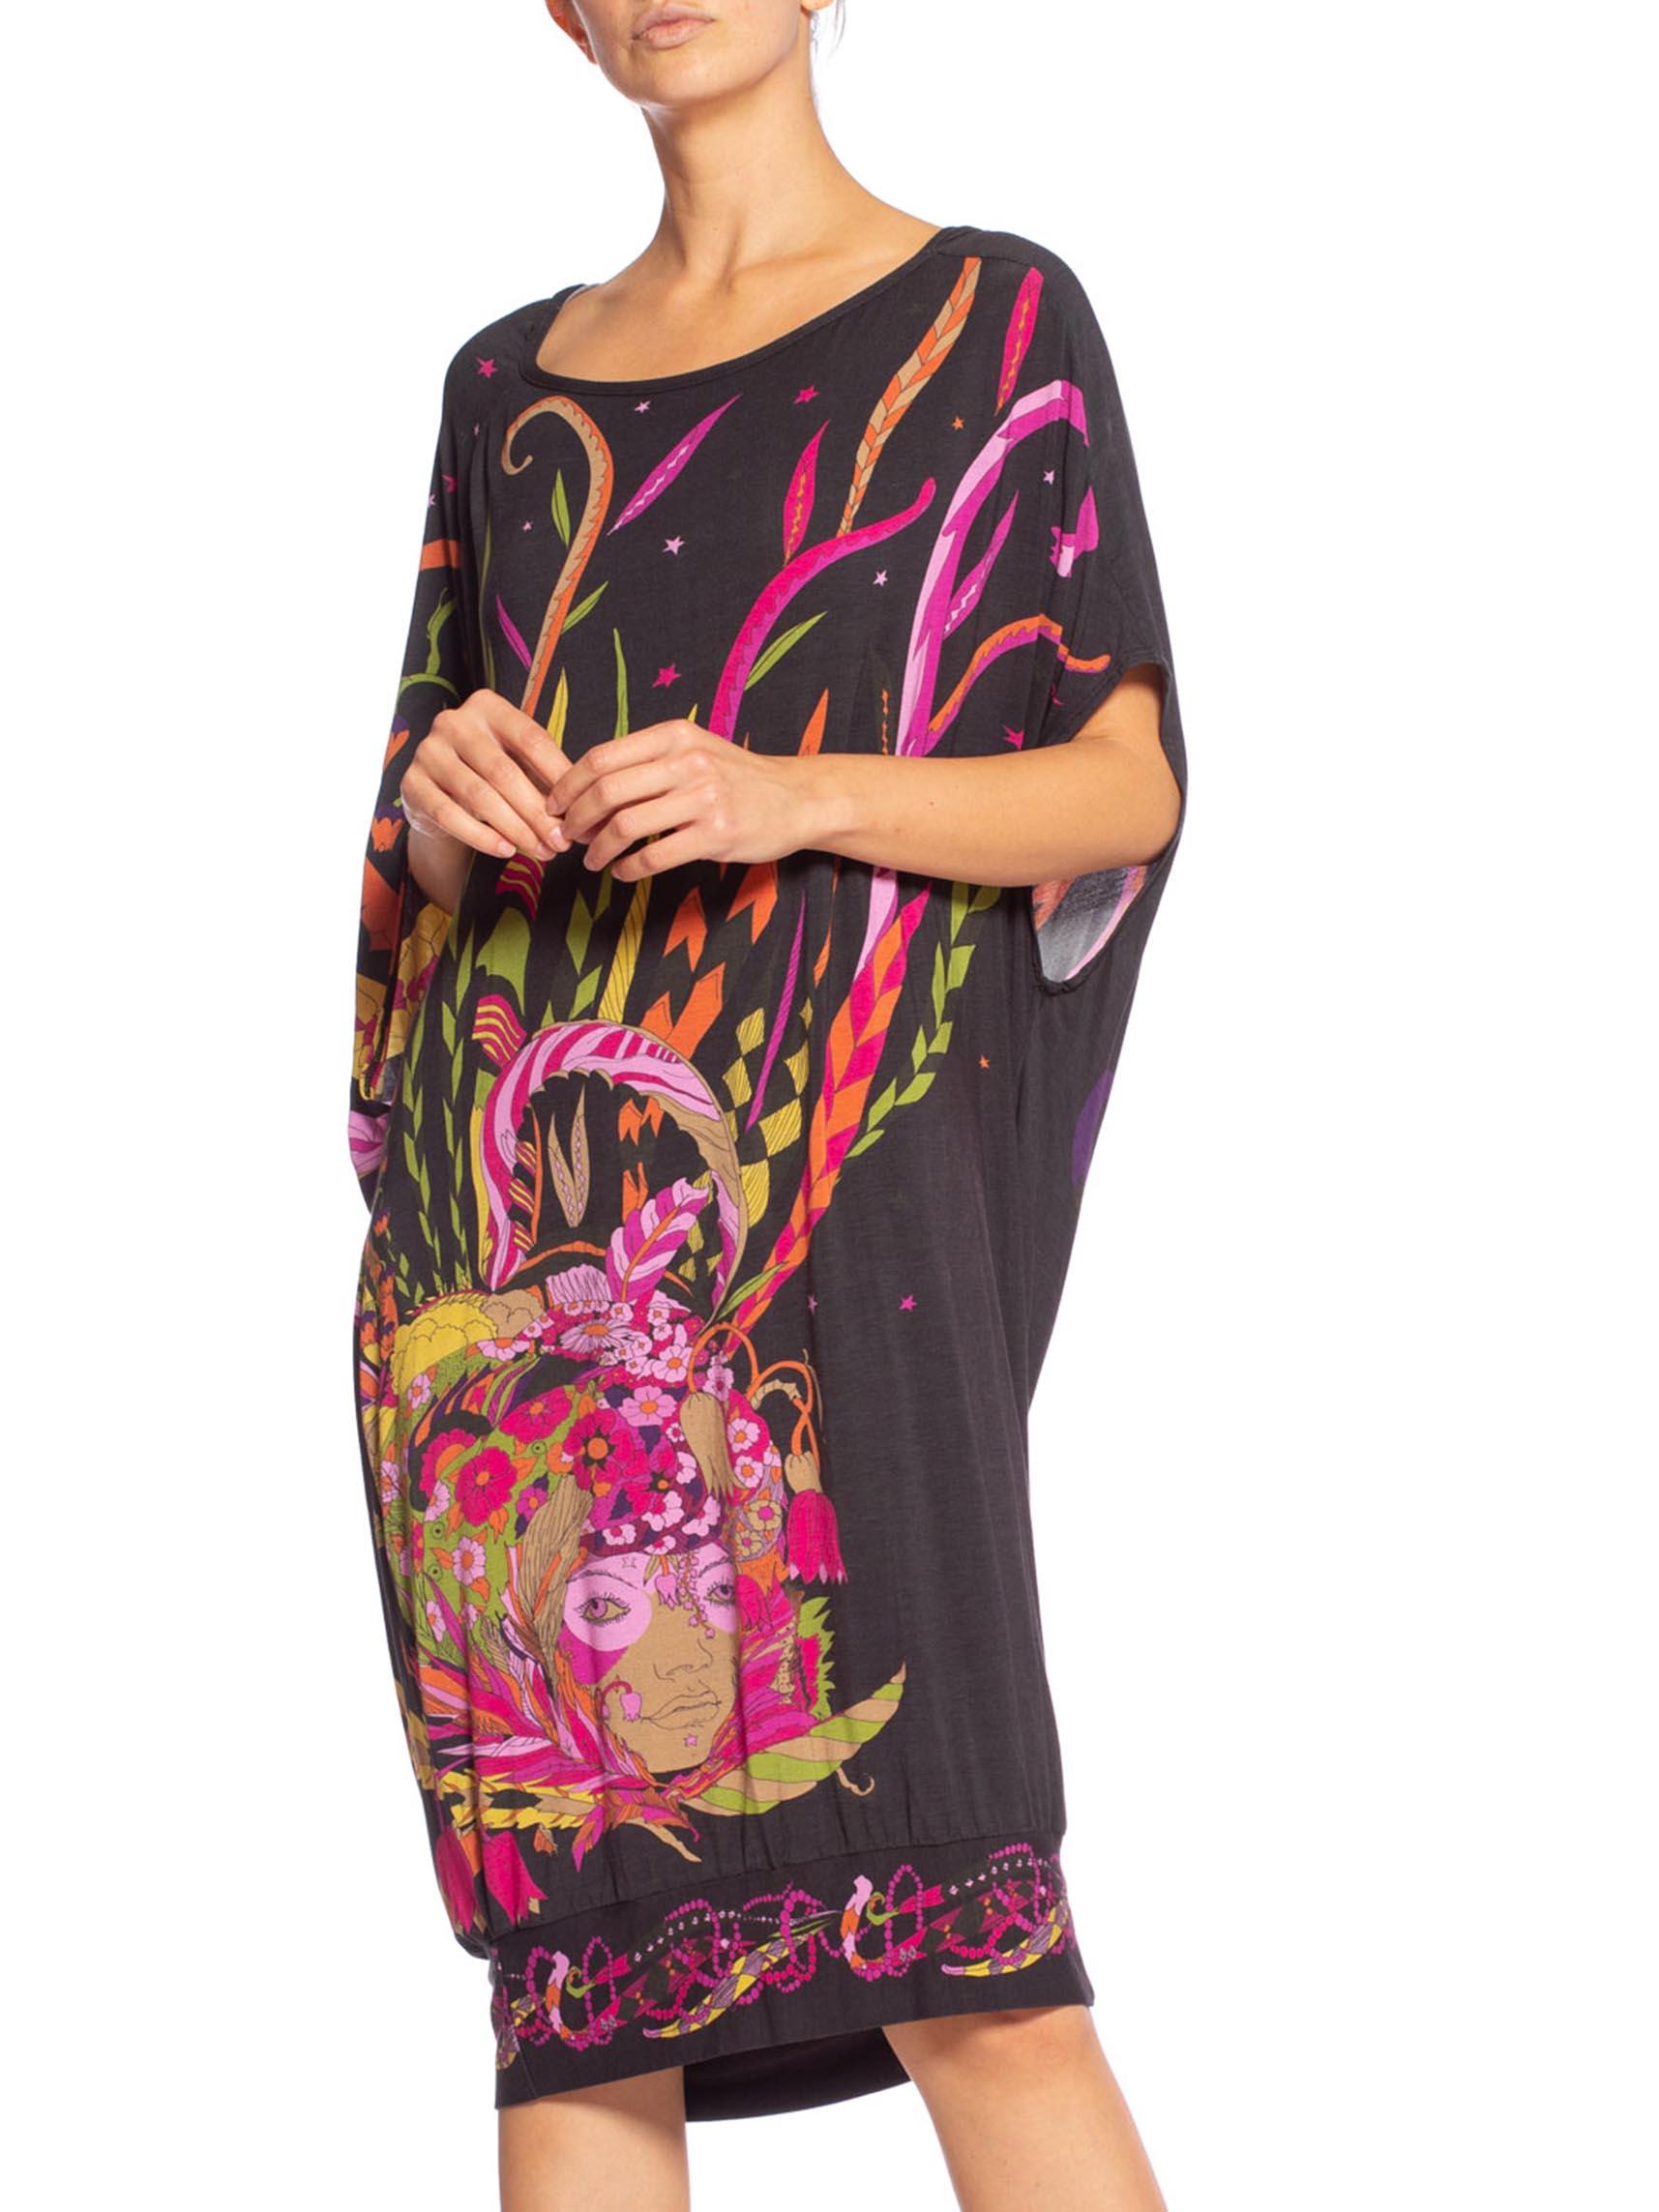 MORPHEW COLLECTION 1970'S Psychedelic Fortune Teller Print Dress 2